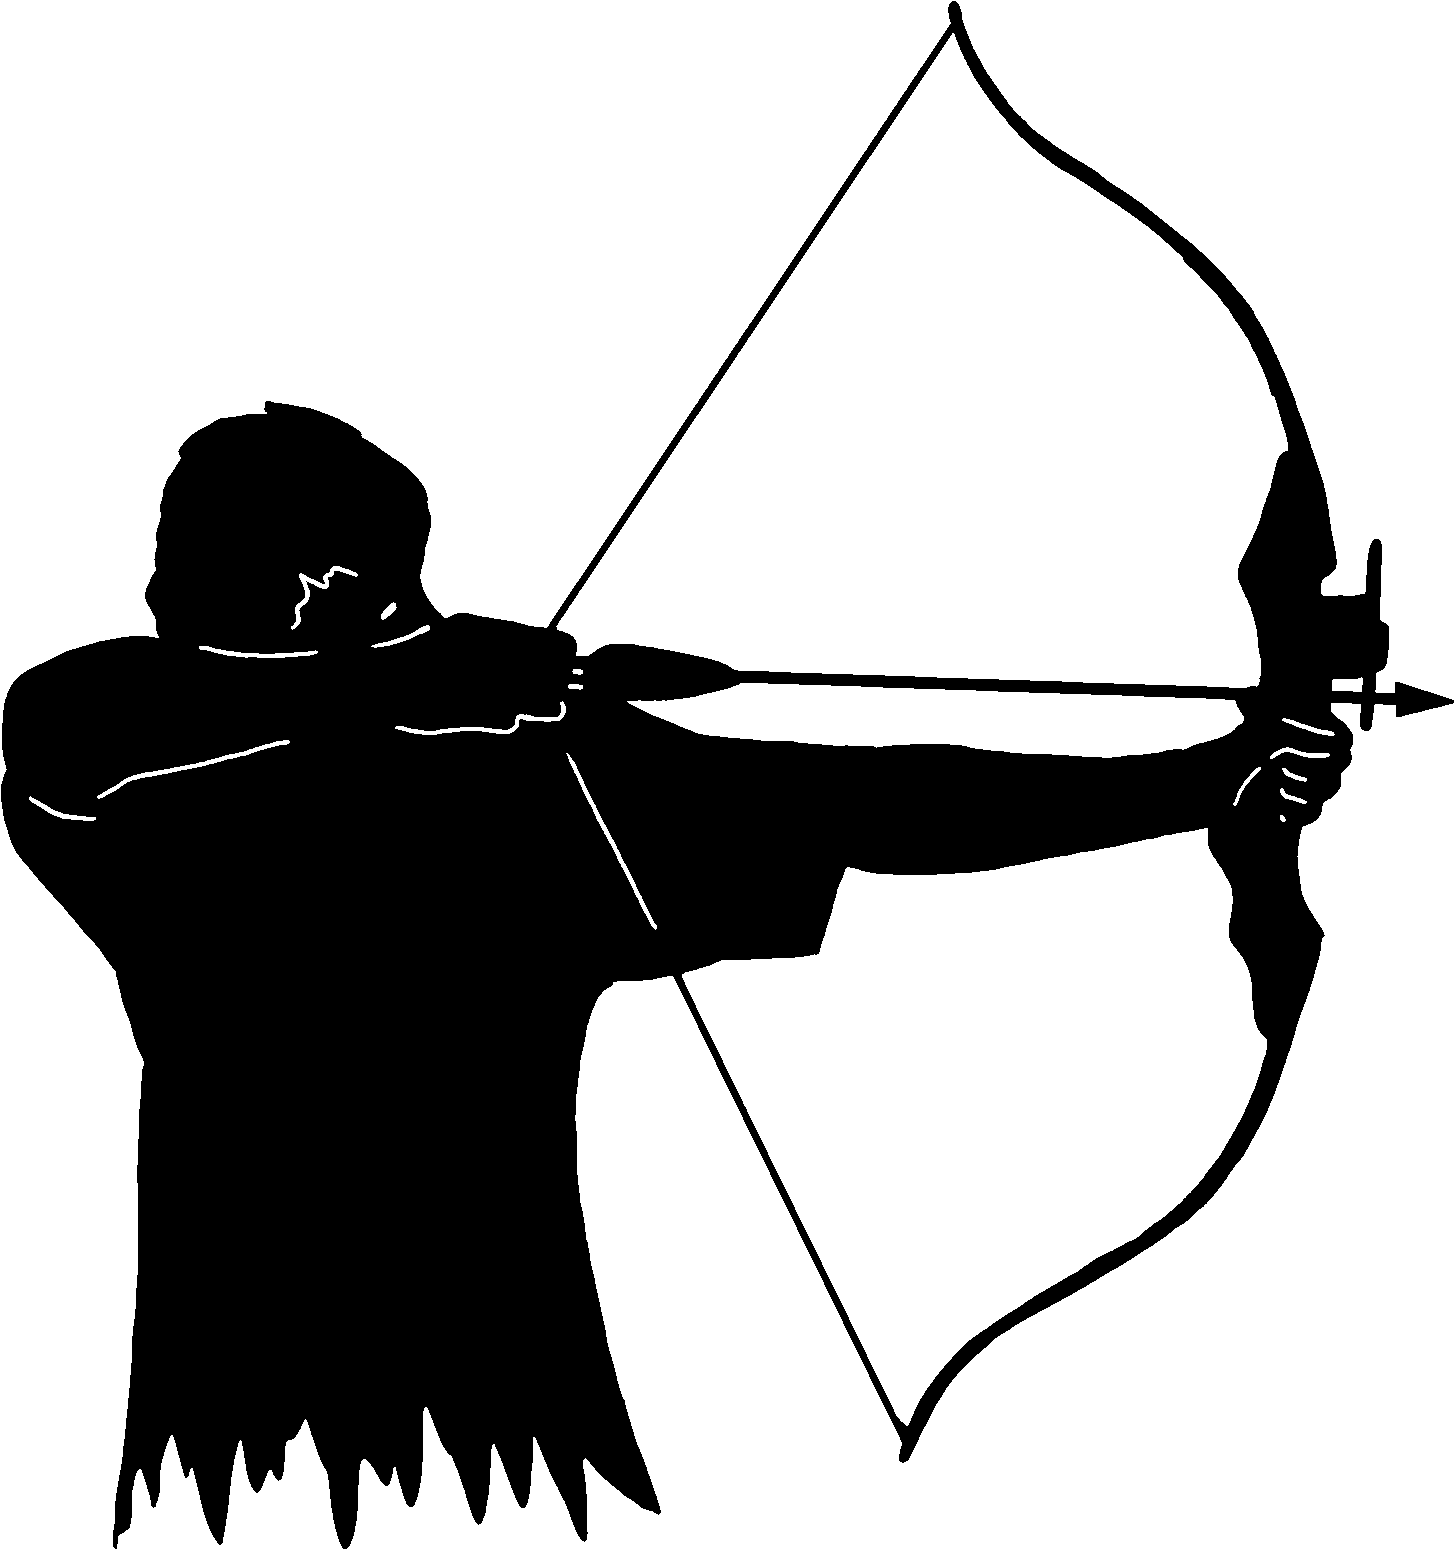 Archery Clipart Black And White.